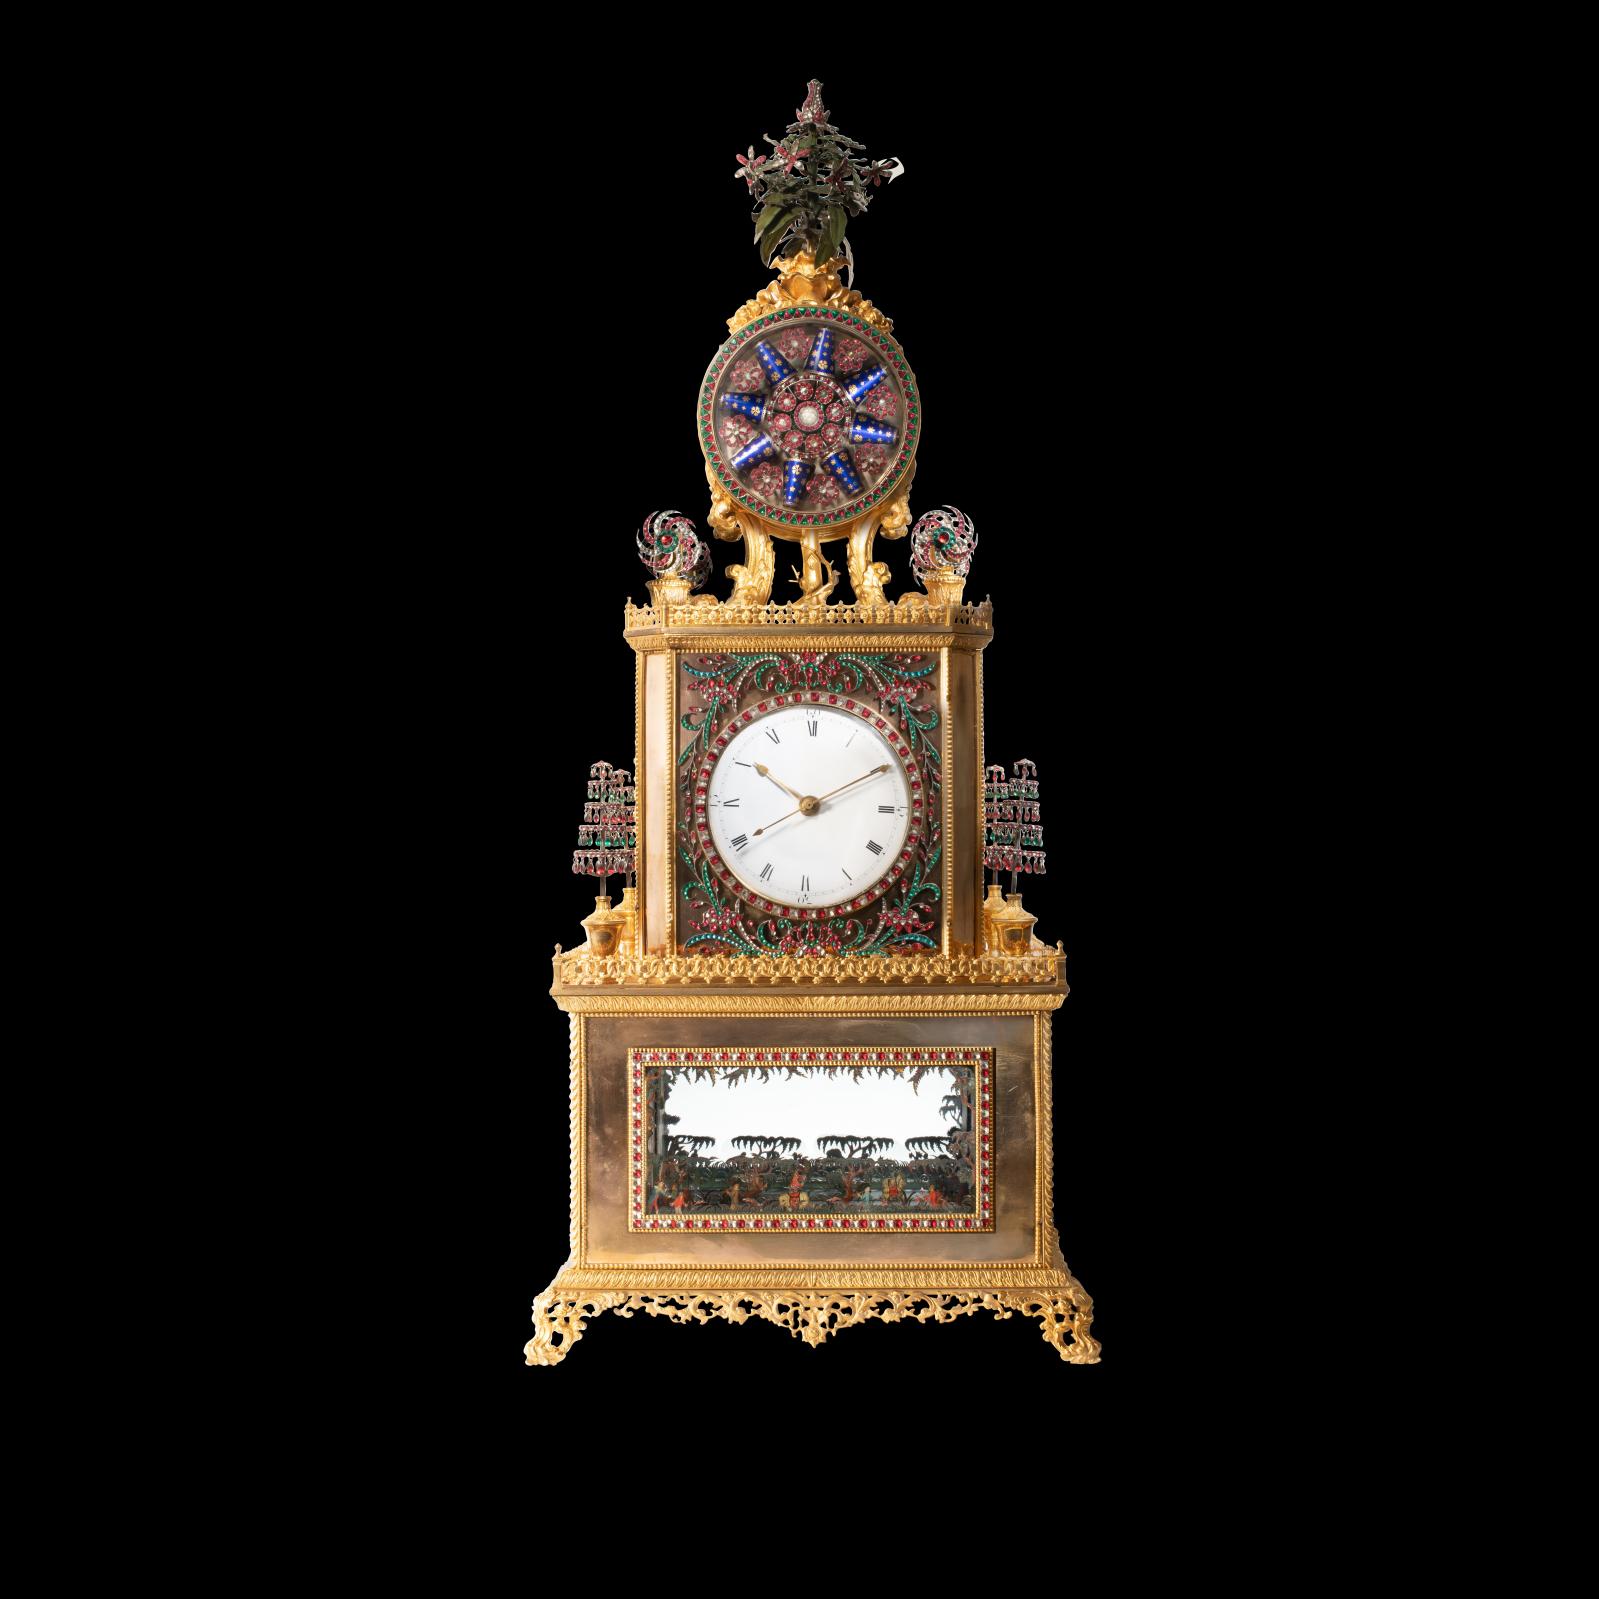 China, Qianlong dynasty (1736-1795). Rare and important imperial automaton clock in gilt bronze and stone inlays, decorated with tributes bearers, h. total 85 cm, base: 36 x 28 cm/h. 33.4 in, base: 14.1 x 11 in. Estimate : by request Sale: June 15, 2022. Aponem.